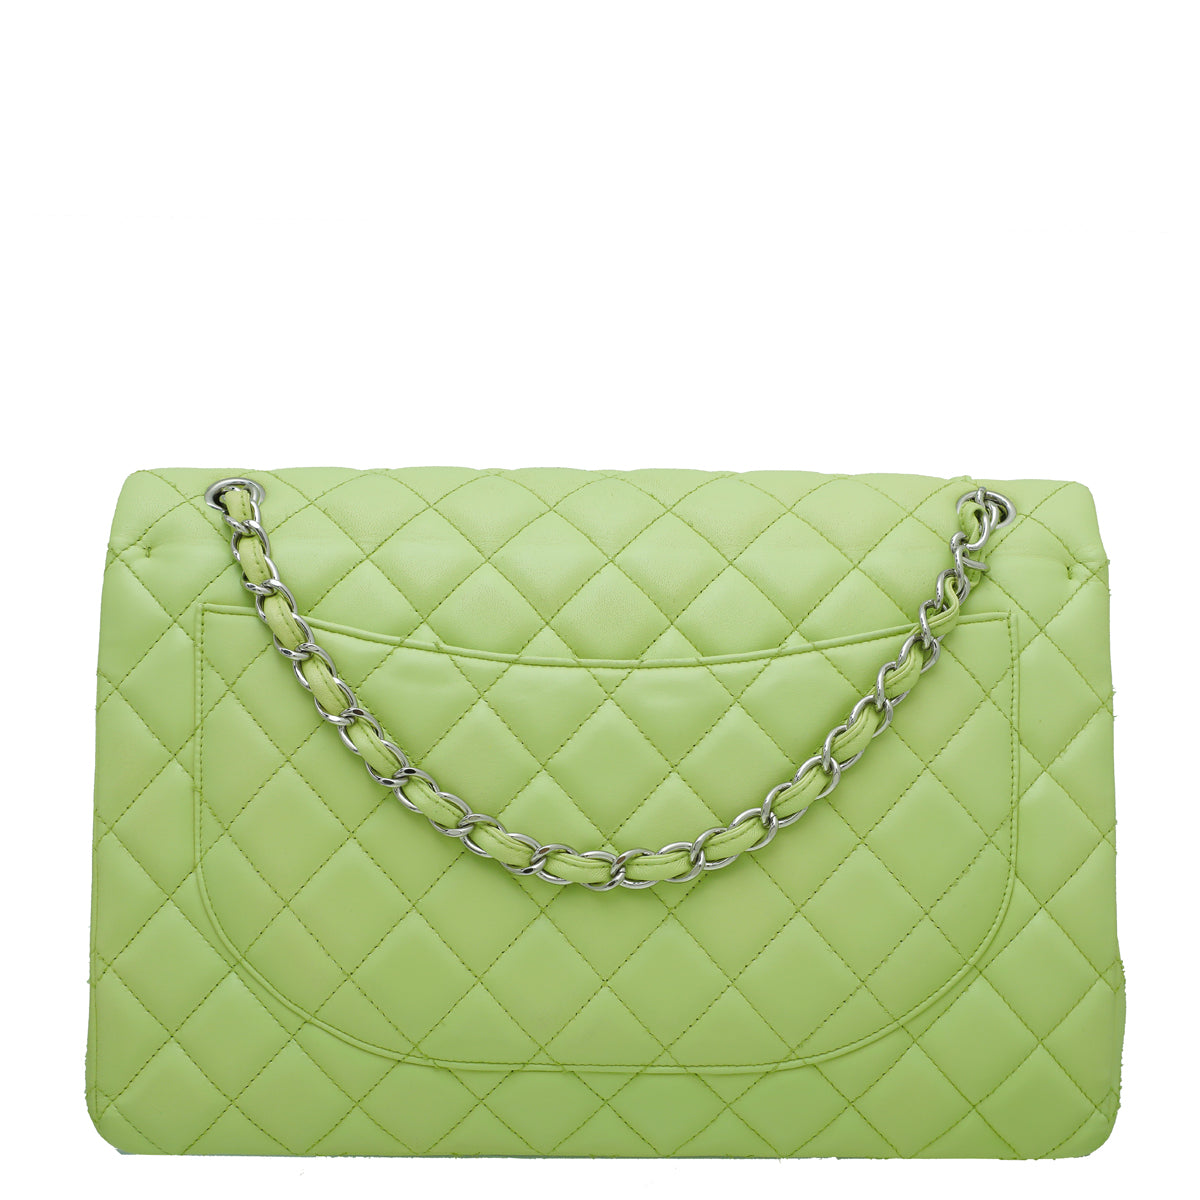 USD50OFF*Chanel Quilted CC GHW Classic Small Chain Shoulder Bag